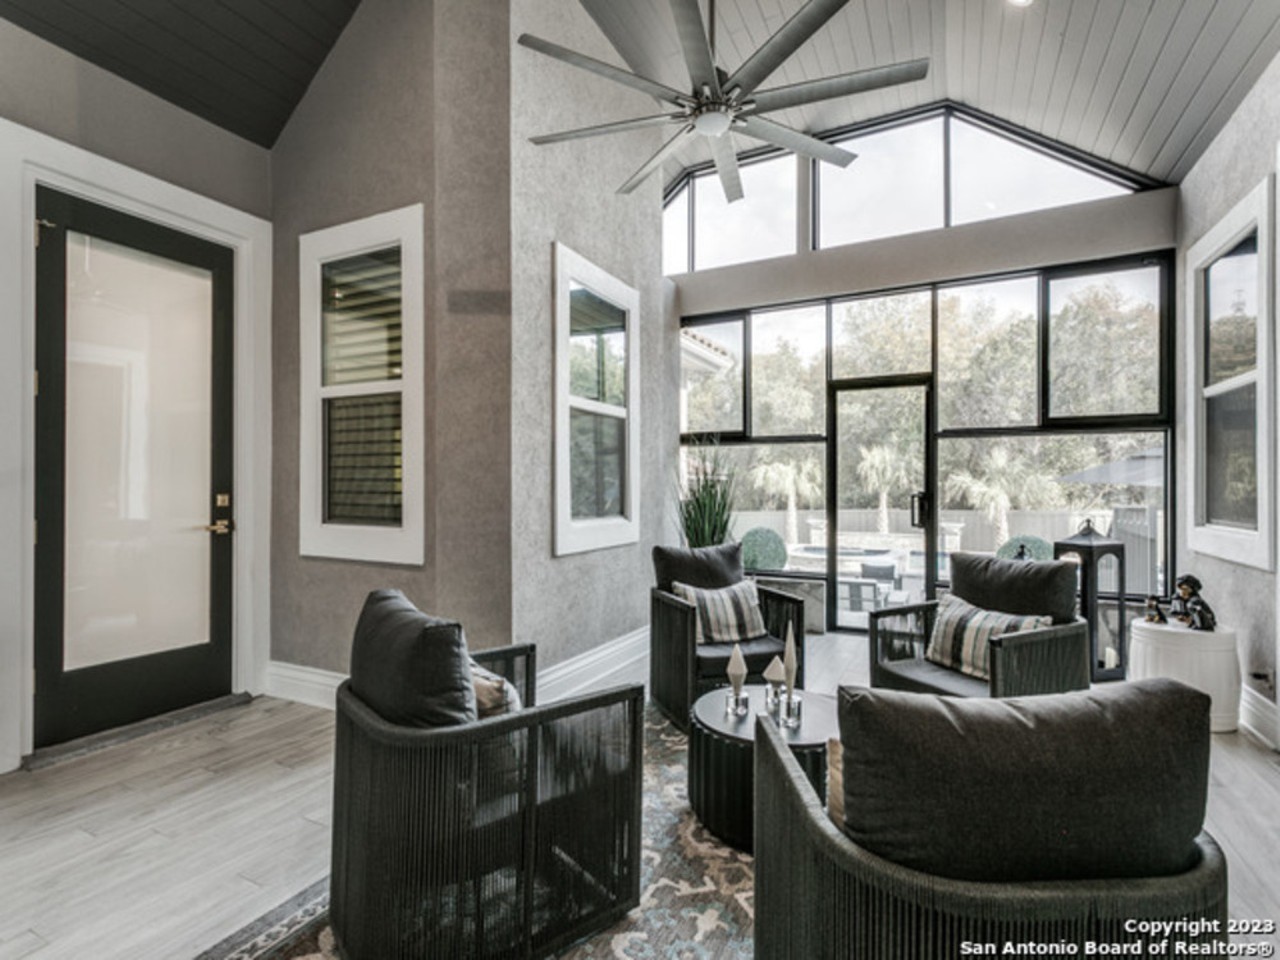 This San Antonio mansion for sale has a media room with its own speakeasy bar